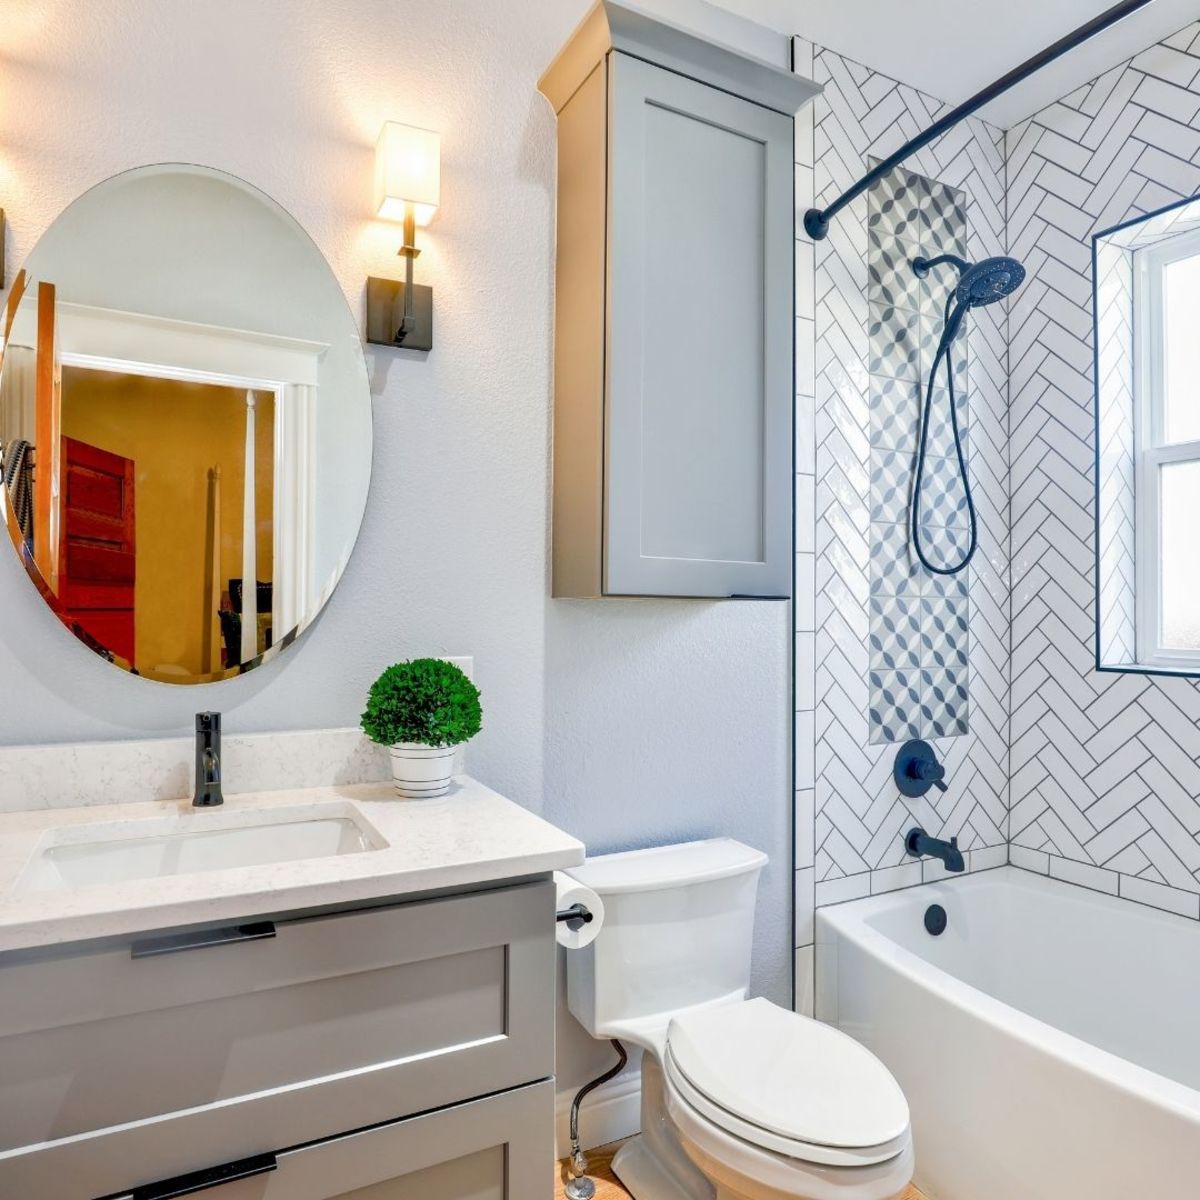 Small bathrooms create many challenges, but the most important one is not cluttering the space. Keep it clean, and introduce natural lights and good ventilation.